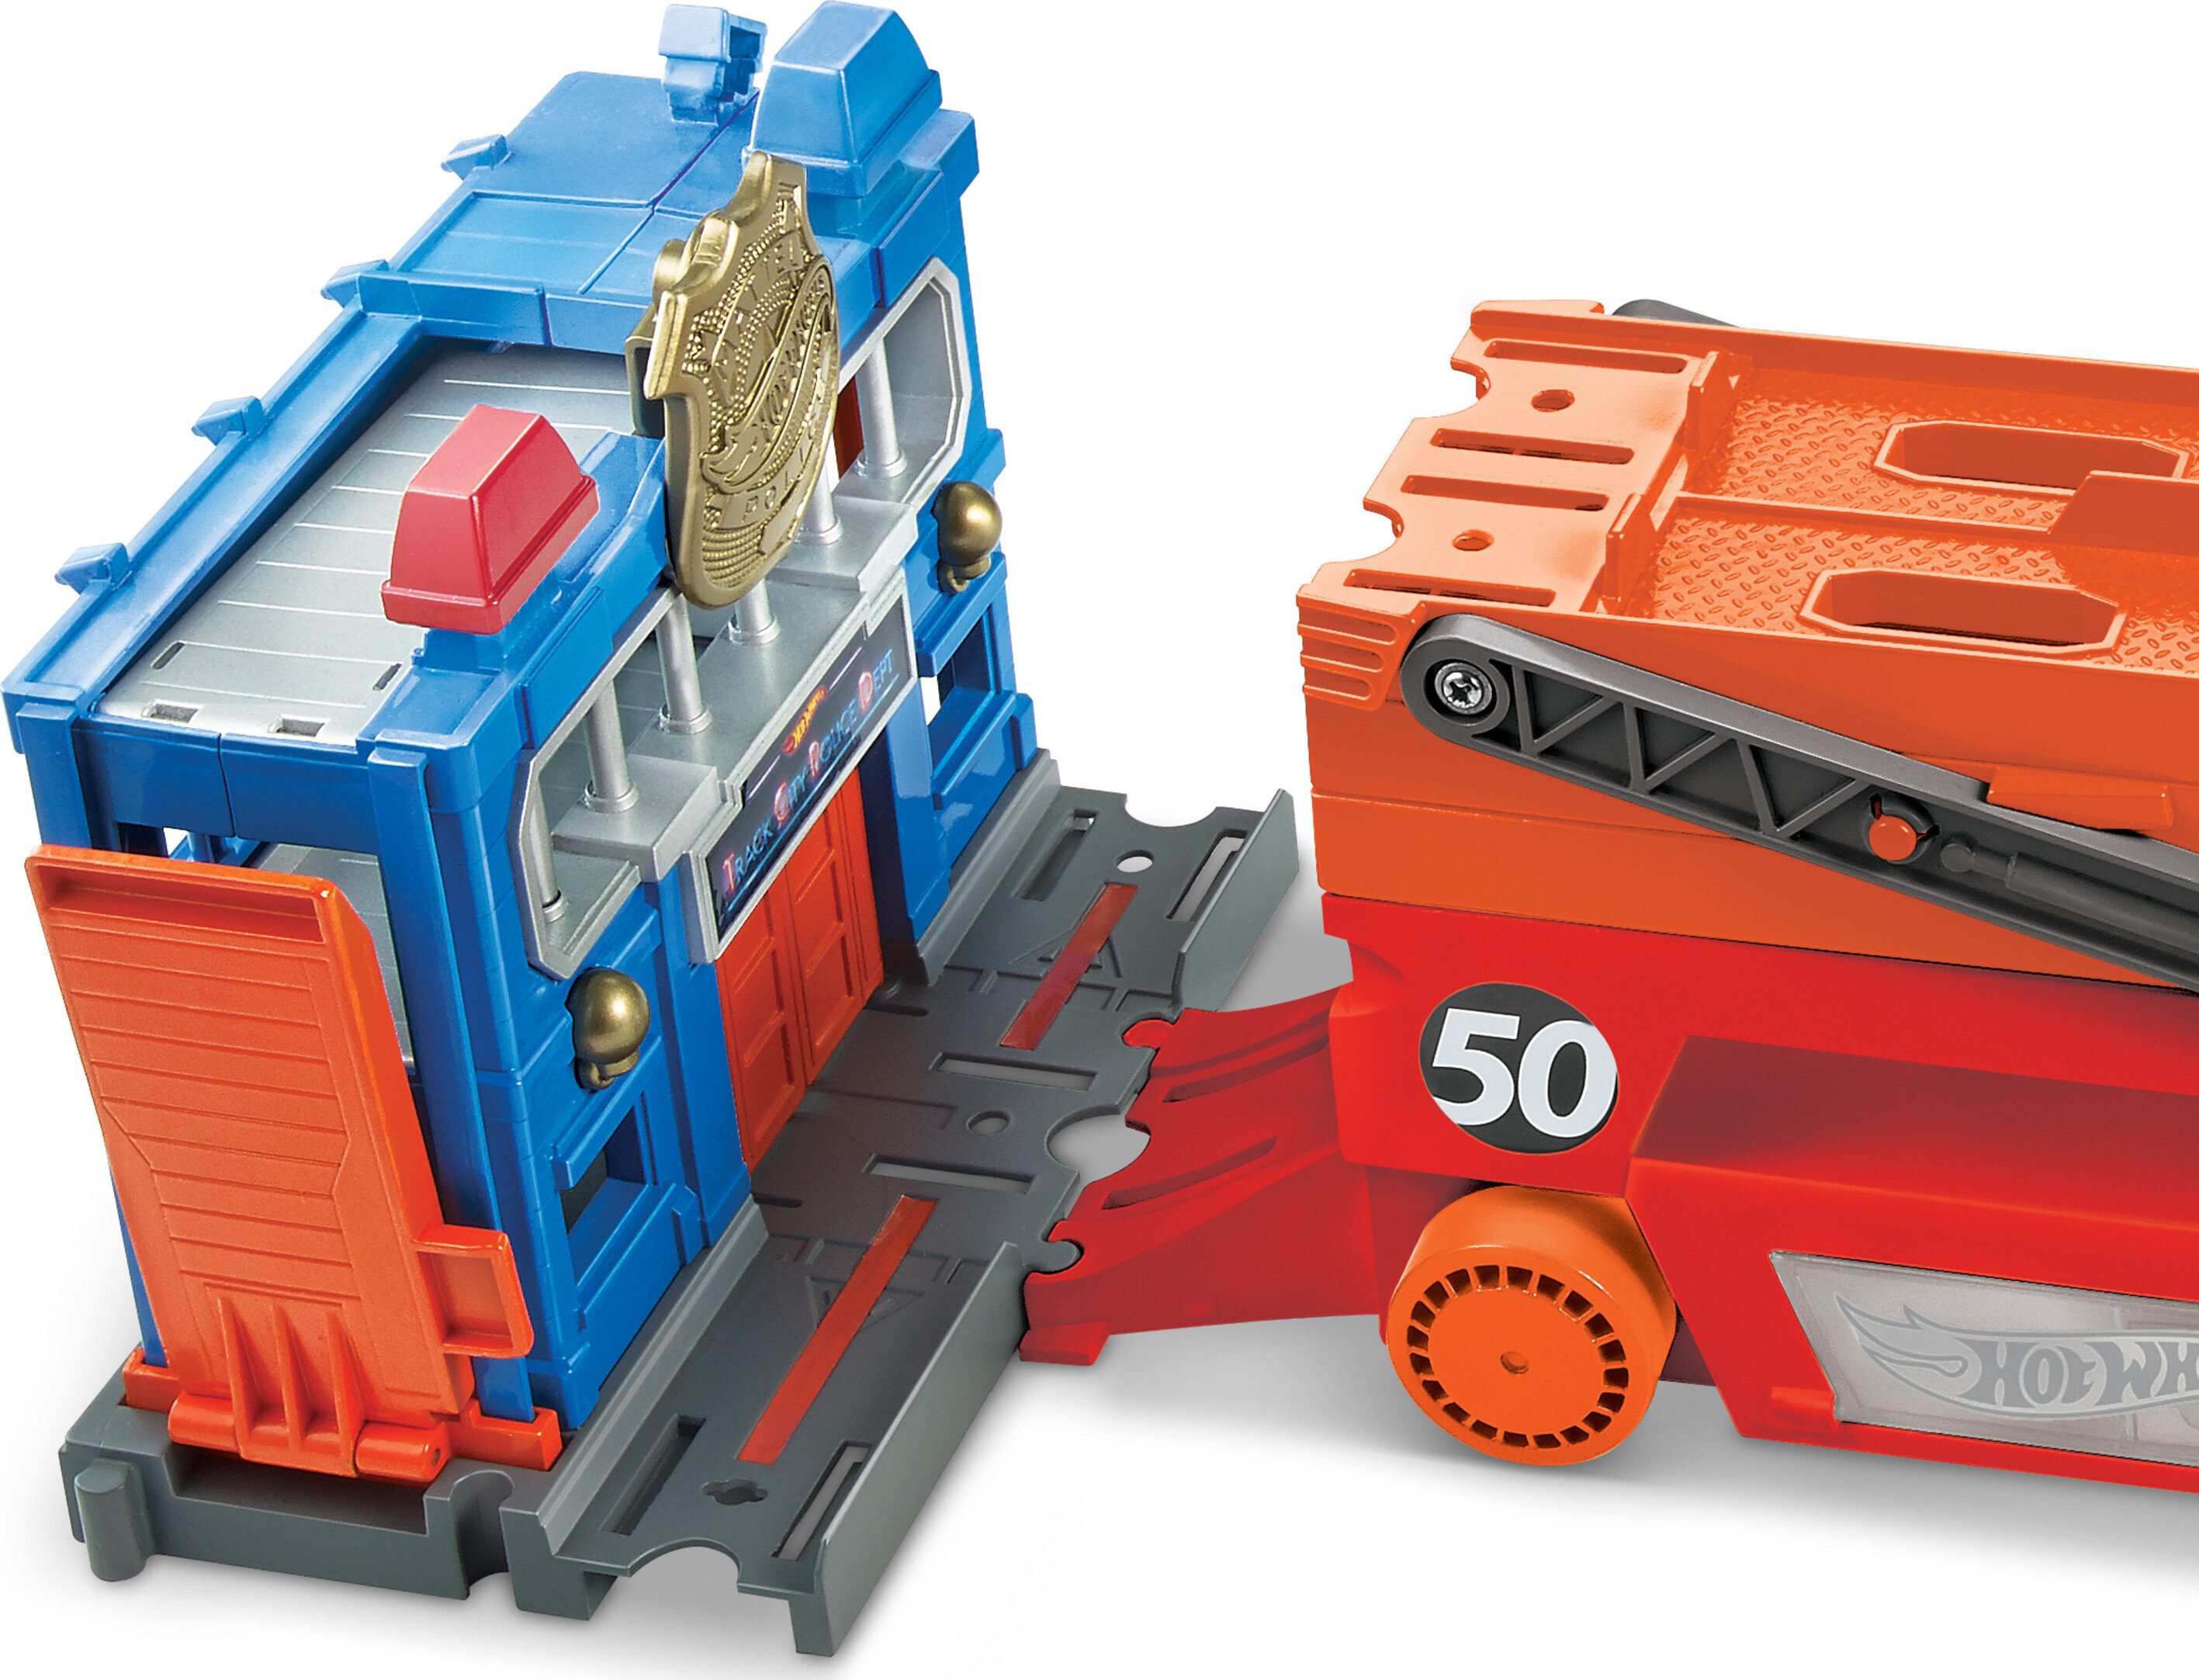 Hot Wheels Mega Hauler with 6 Expandable Levels, Stores up to 50 1:64 Scale Toy Vehicles - image 5 of 7